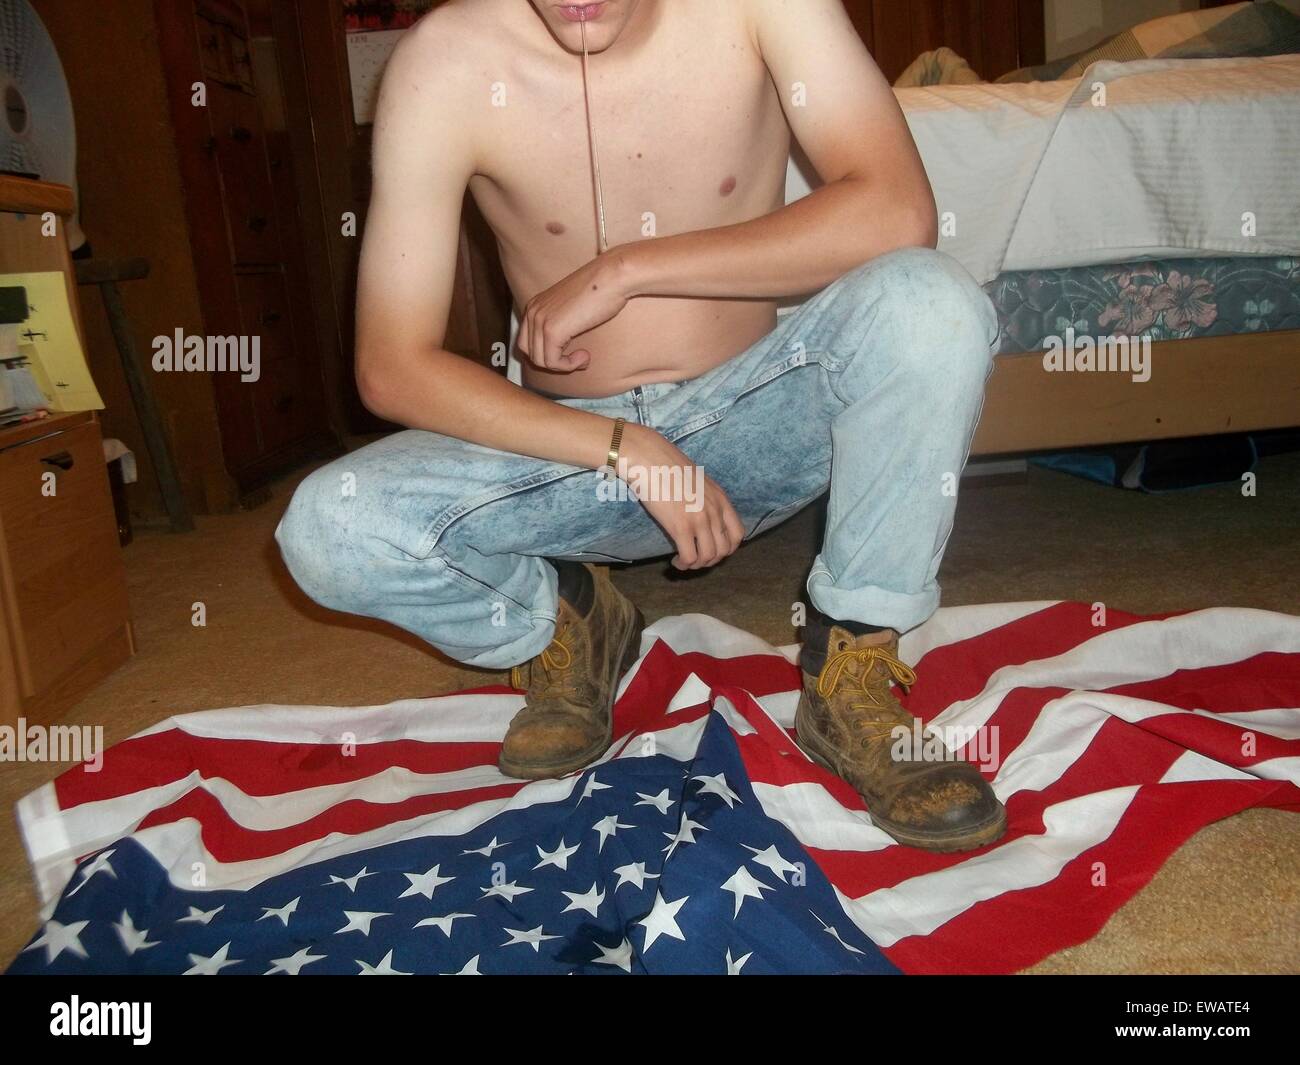 Charleston, South Carolina, USA. 21st June, 2015. A photo from a white supremacist website showing Dylann Storm Roof stepping and spitting on an American flag March 11, 2015. Roof murdered nine members of the Emanuel African Methodist Episcopal Church in a racially motivated killing on June 17, 2015 in Charleston, S.C. Credit:  Planetpix/Alamy Live News Stock Photo